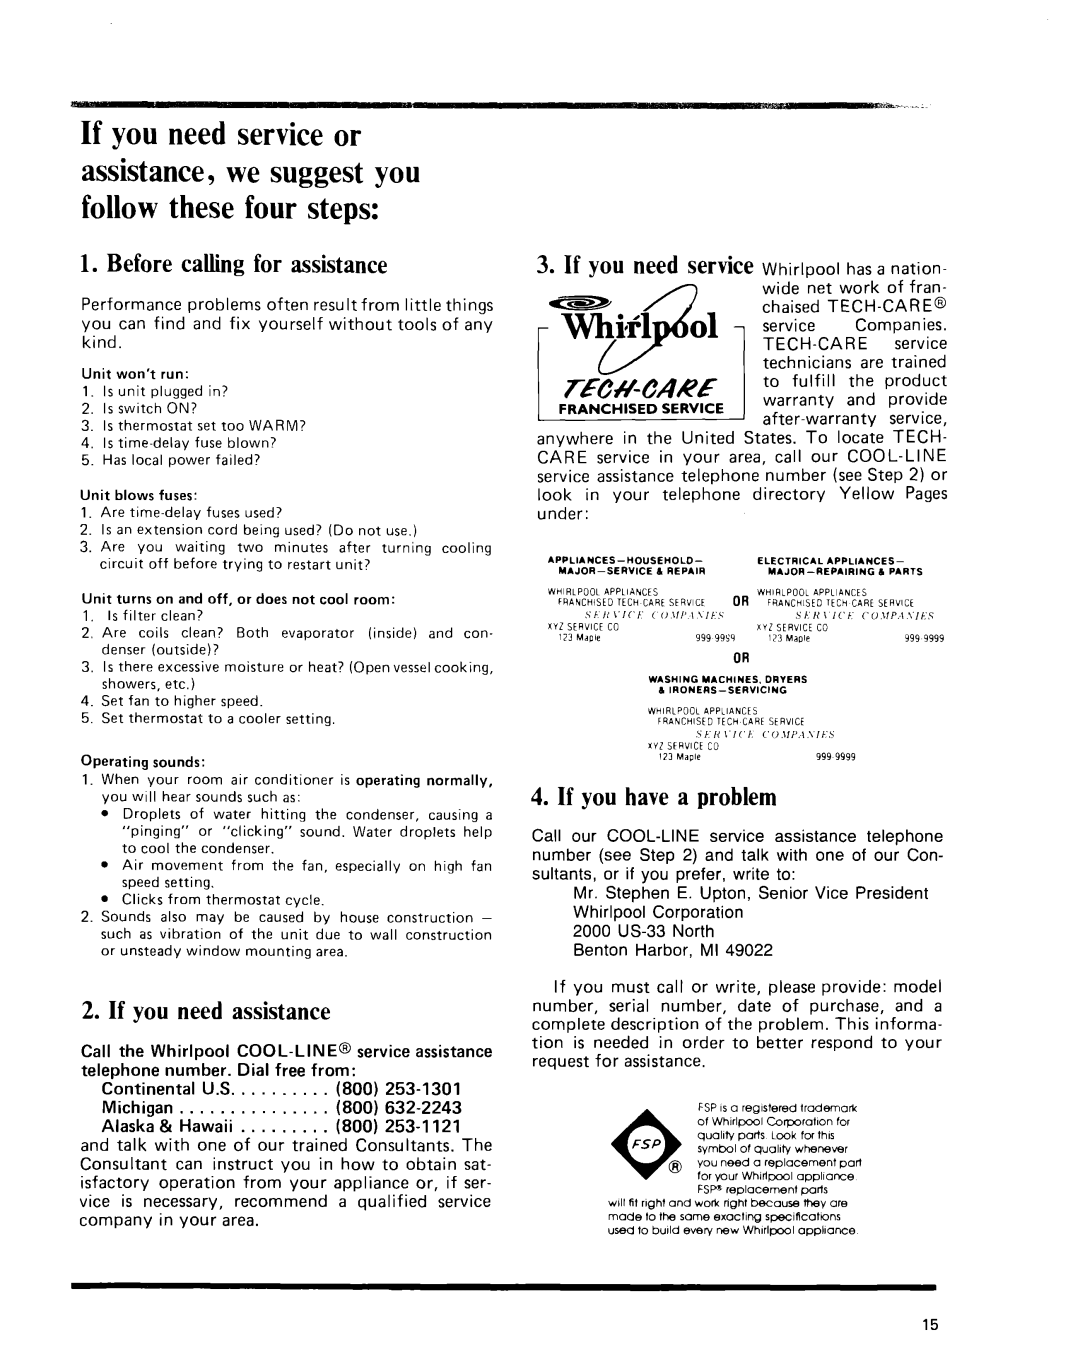 Whirlpool Air Conditioner manual Before calling for assistance, If you need assistance, If you havea problem 